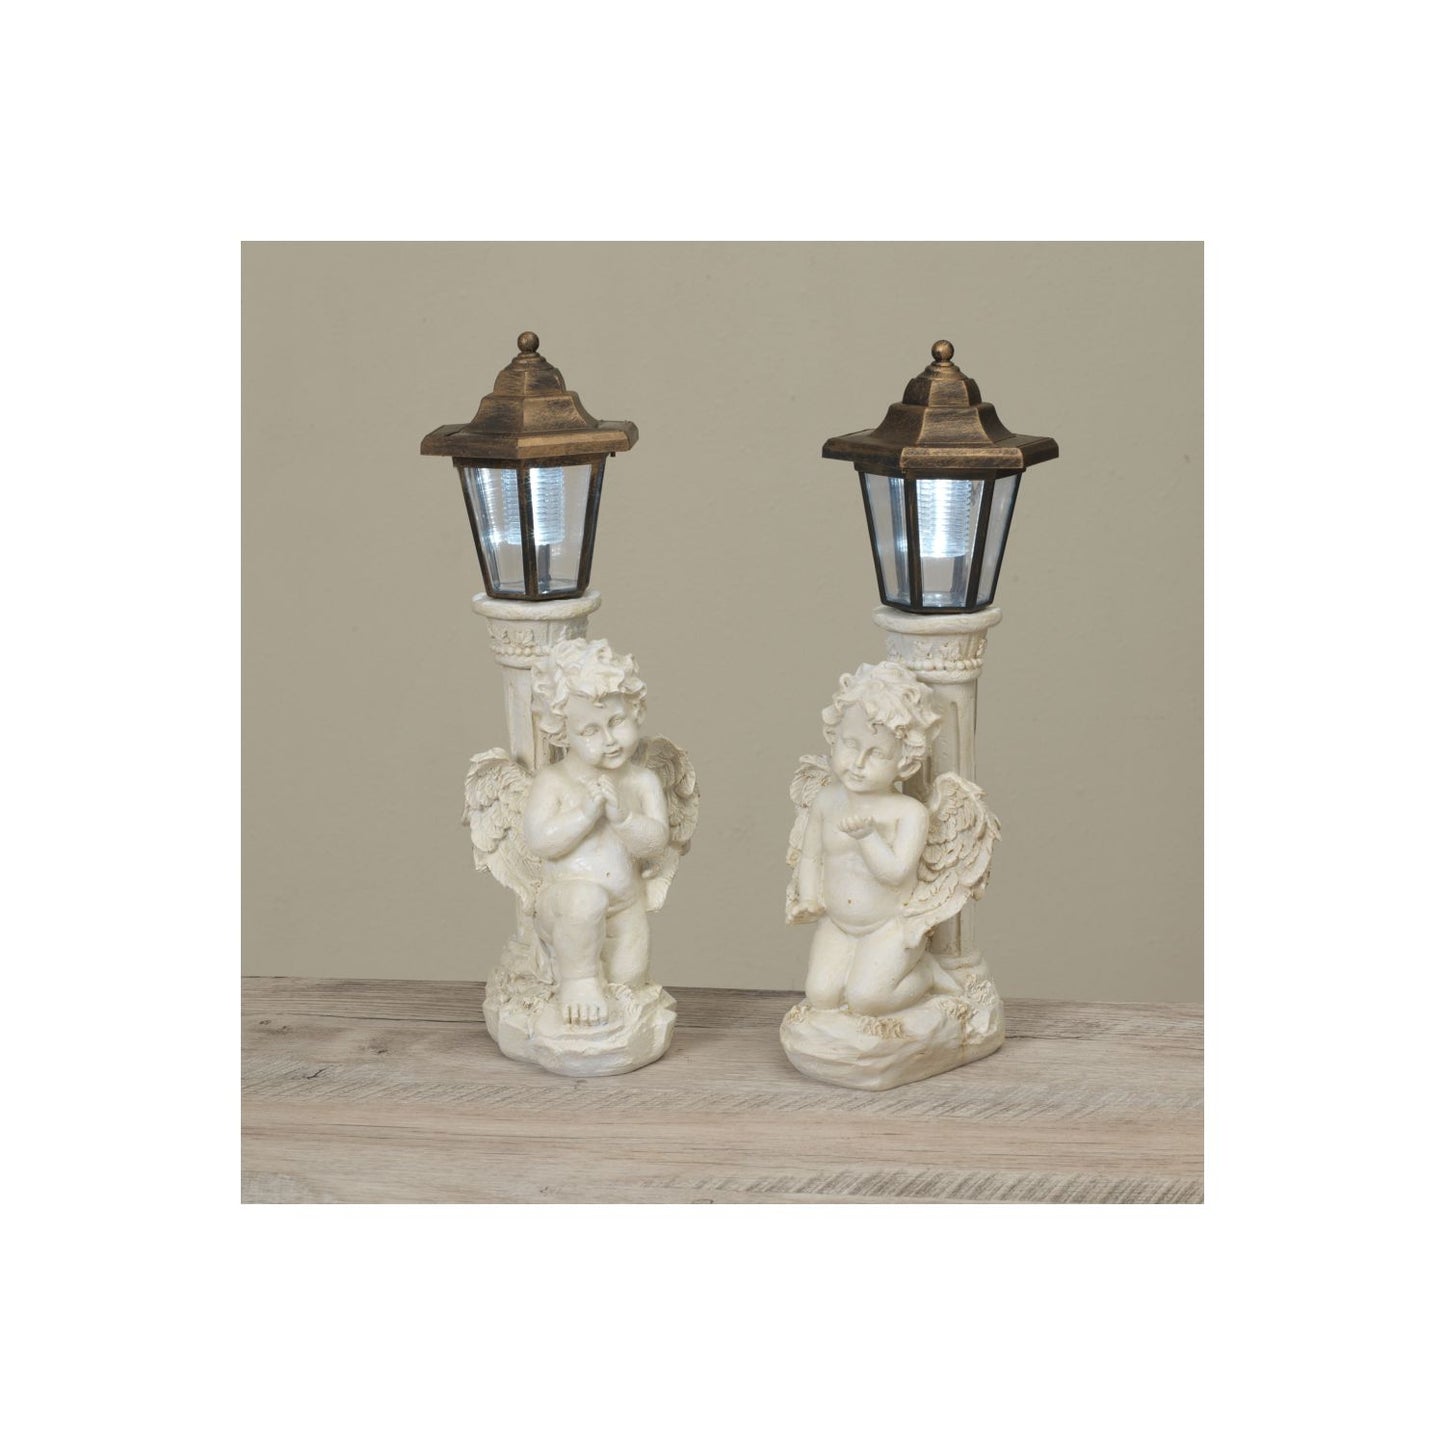 Gerson Company 15.3"H B/O Solar Lighted Resin Angel W/ Lamp Post, 2 Assorted